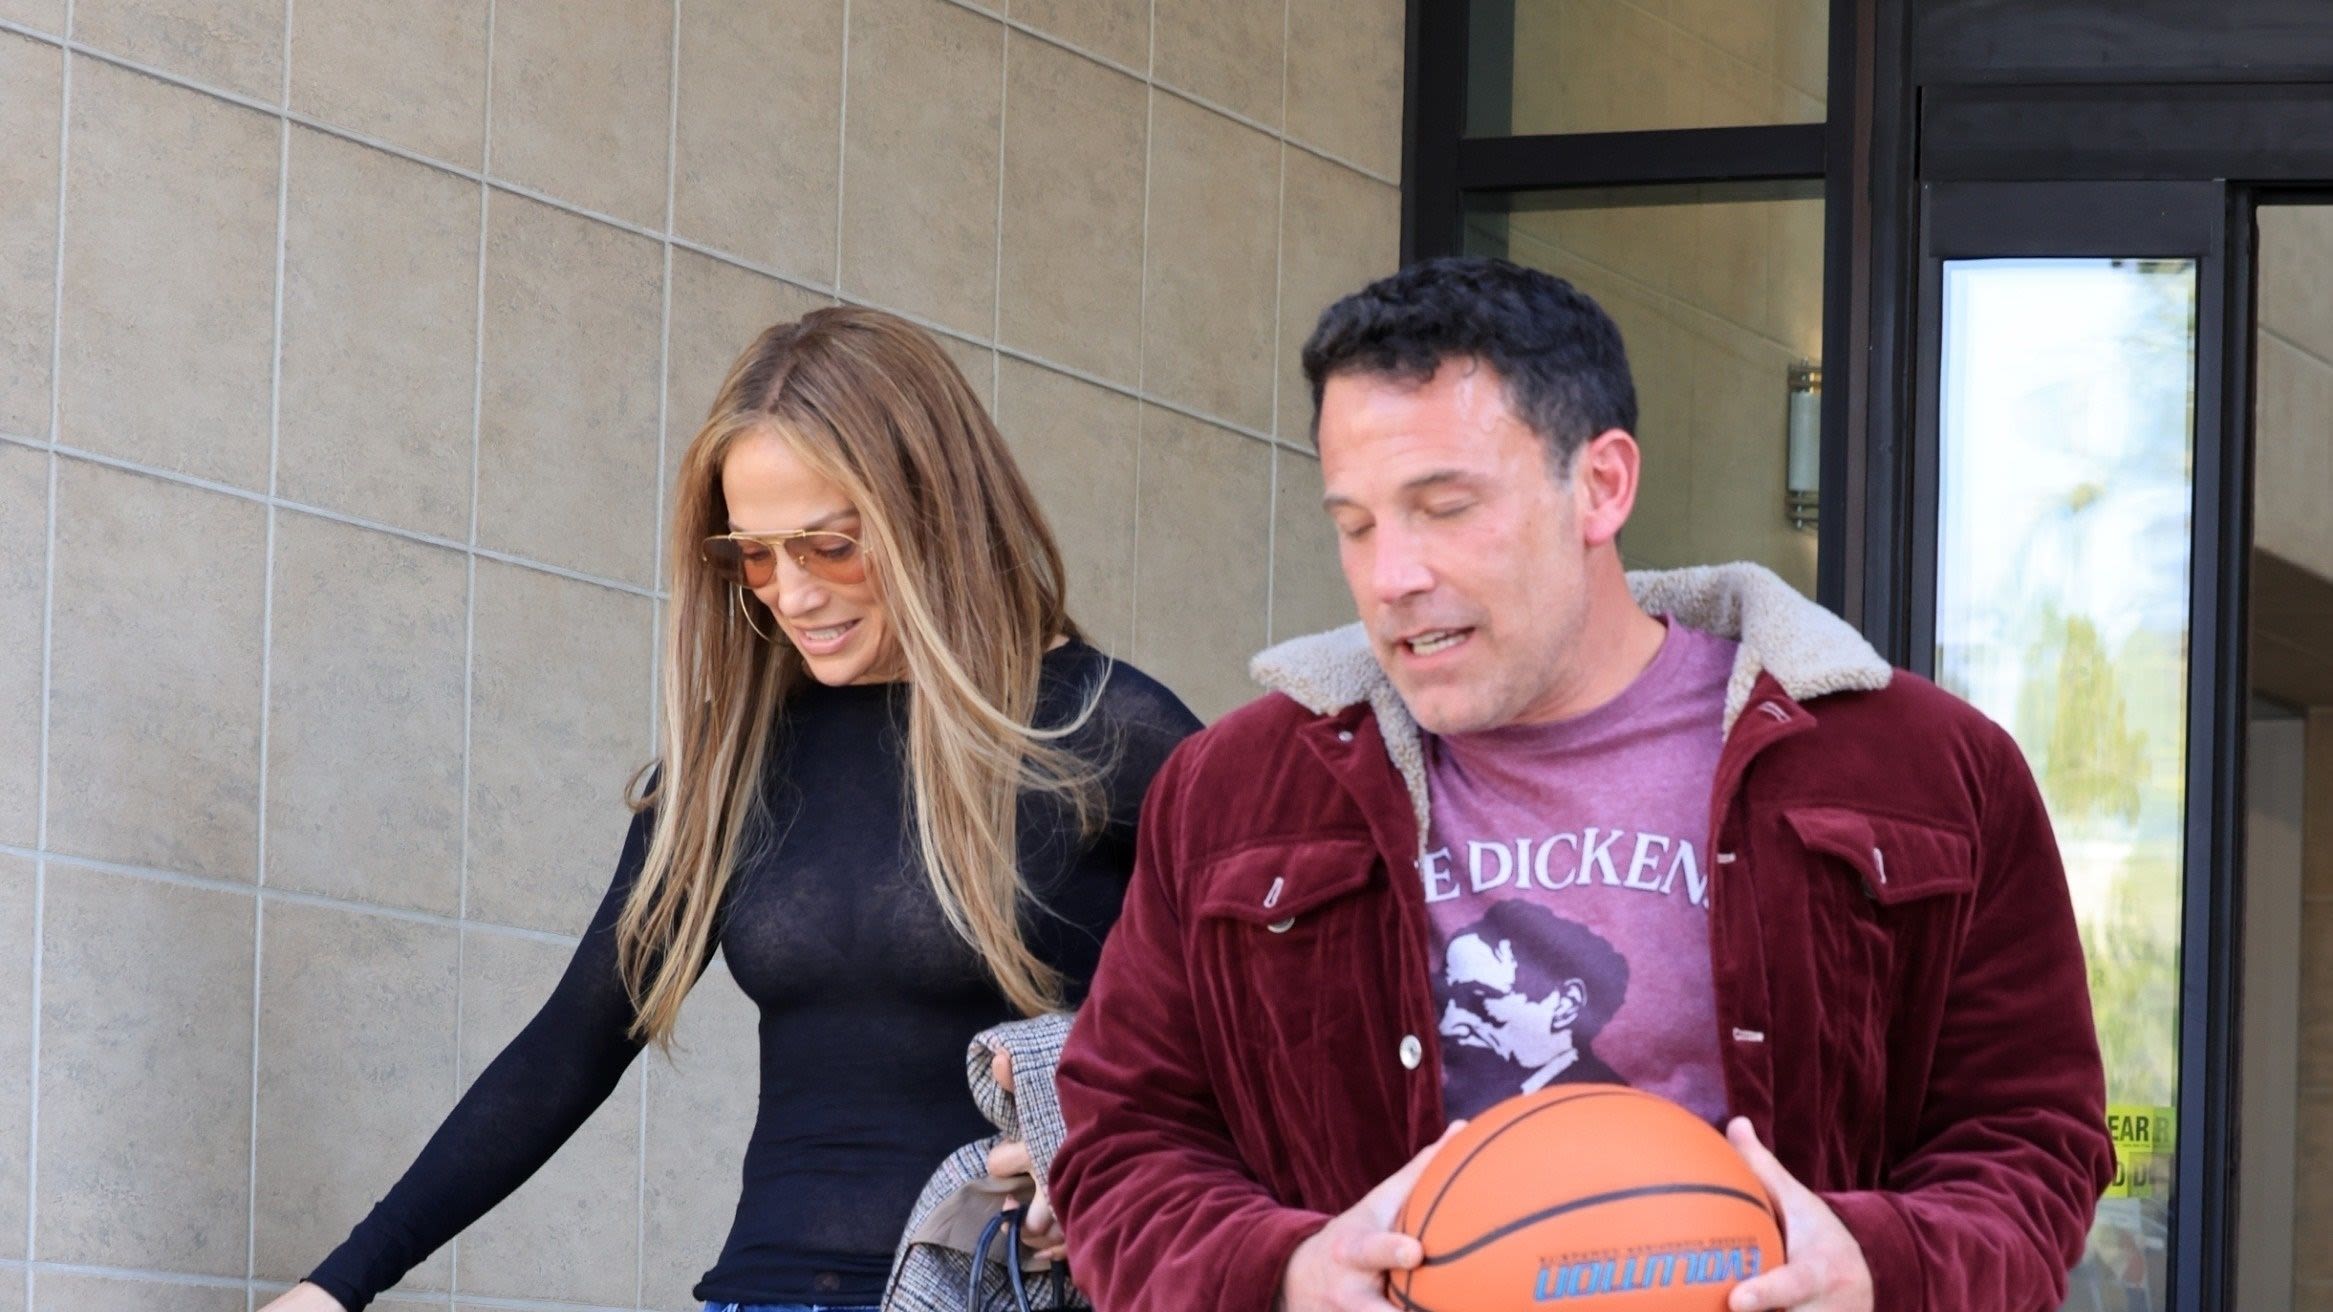 Ben Affleck and J.Lo Reunite at a Basketball Game After She Cancels Tour to Be With Family